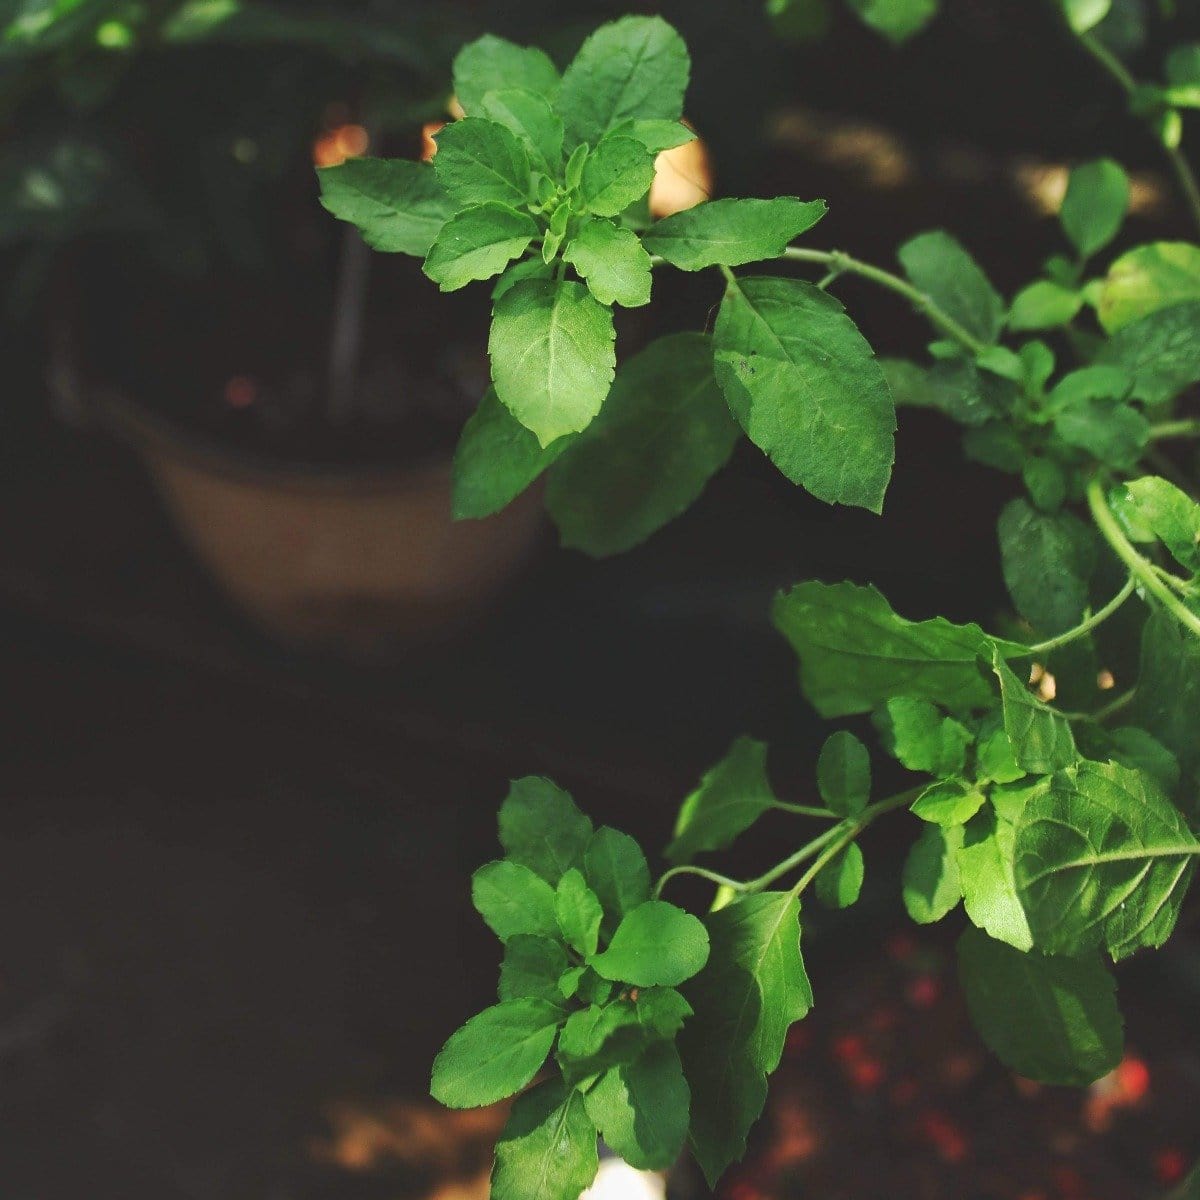 A close-up of bright green basil leaves on a plant, with a blurred garden background. The leaves are fresh and well-defined, much like the vibrant ingredients in Bliss: Sacred Tulsi Adaptogen Tea by Magic Hour, indicating a healthy plant.